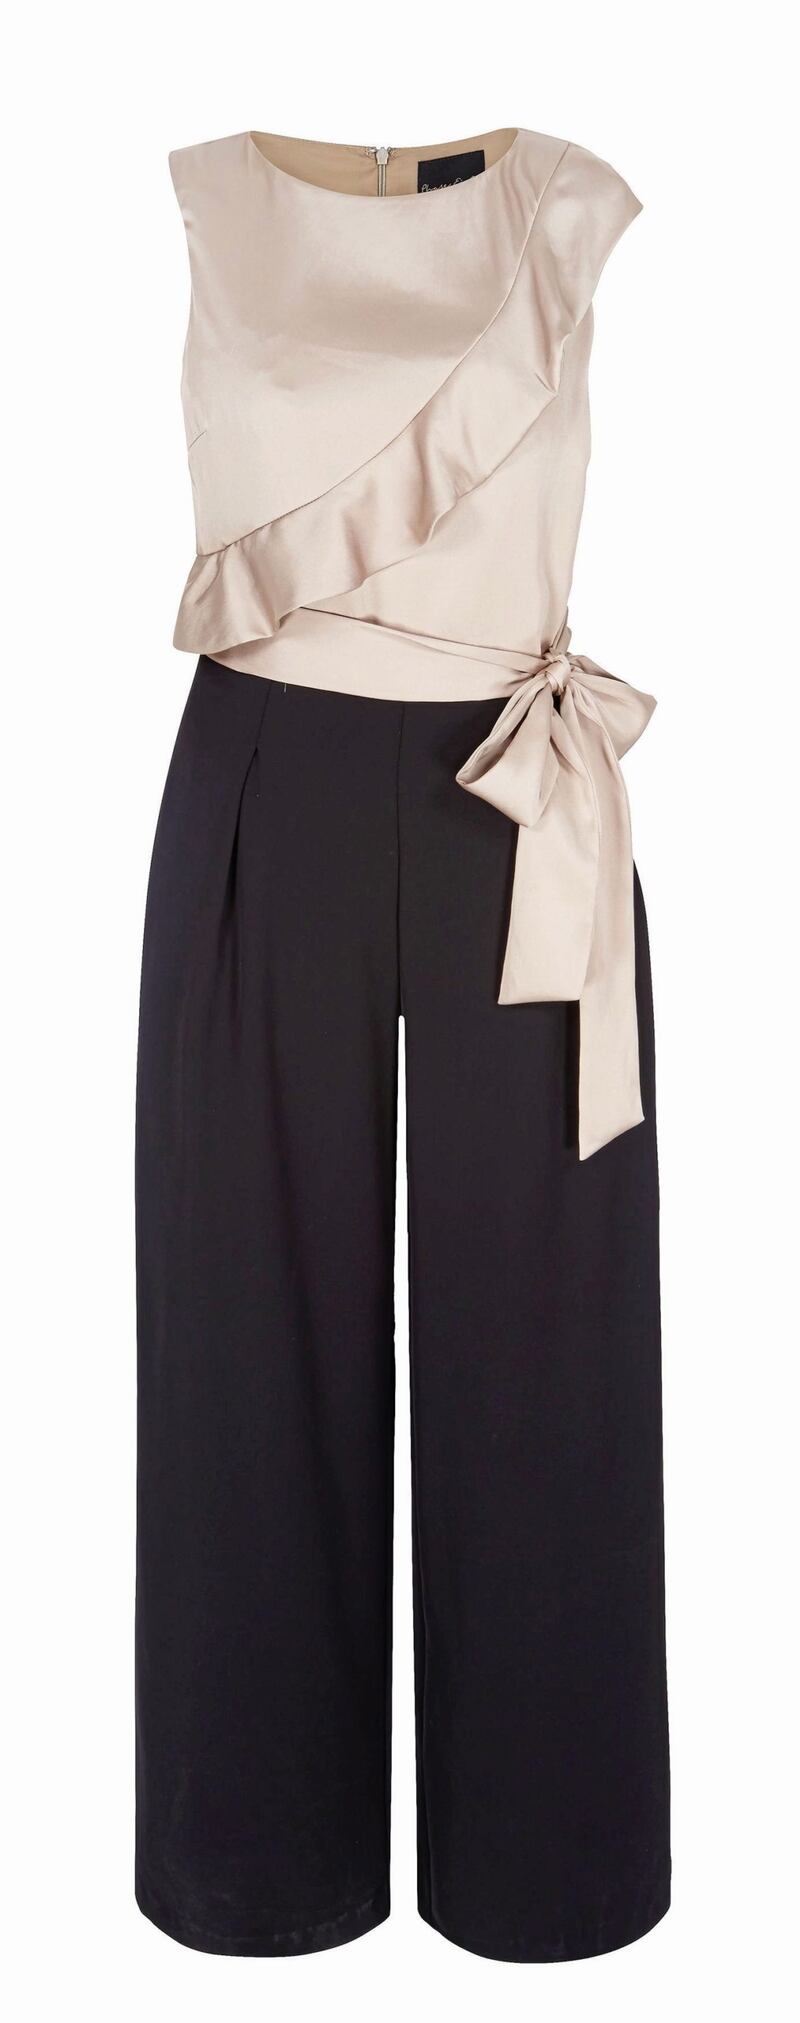 Phase Eight Florentine Jumpsuit, &pound;85, available from John Lewis 